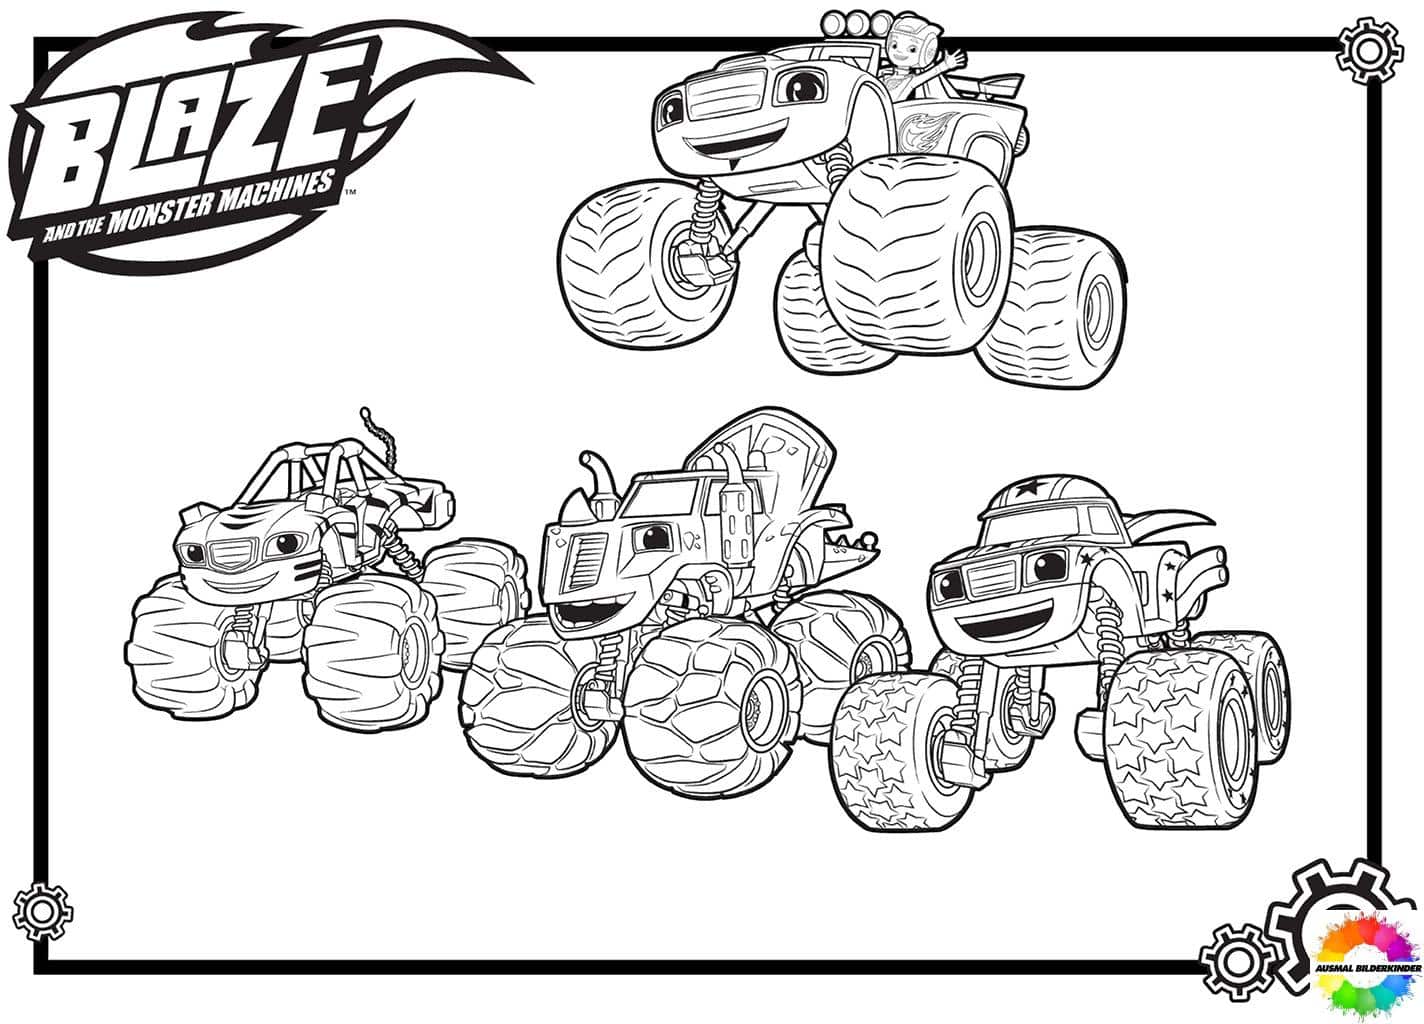 Blaze and the Monster Machines 18